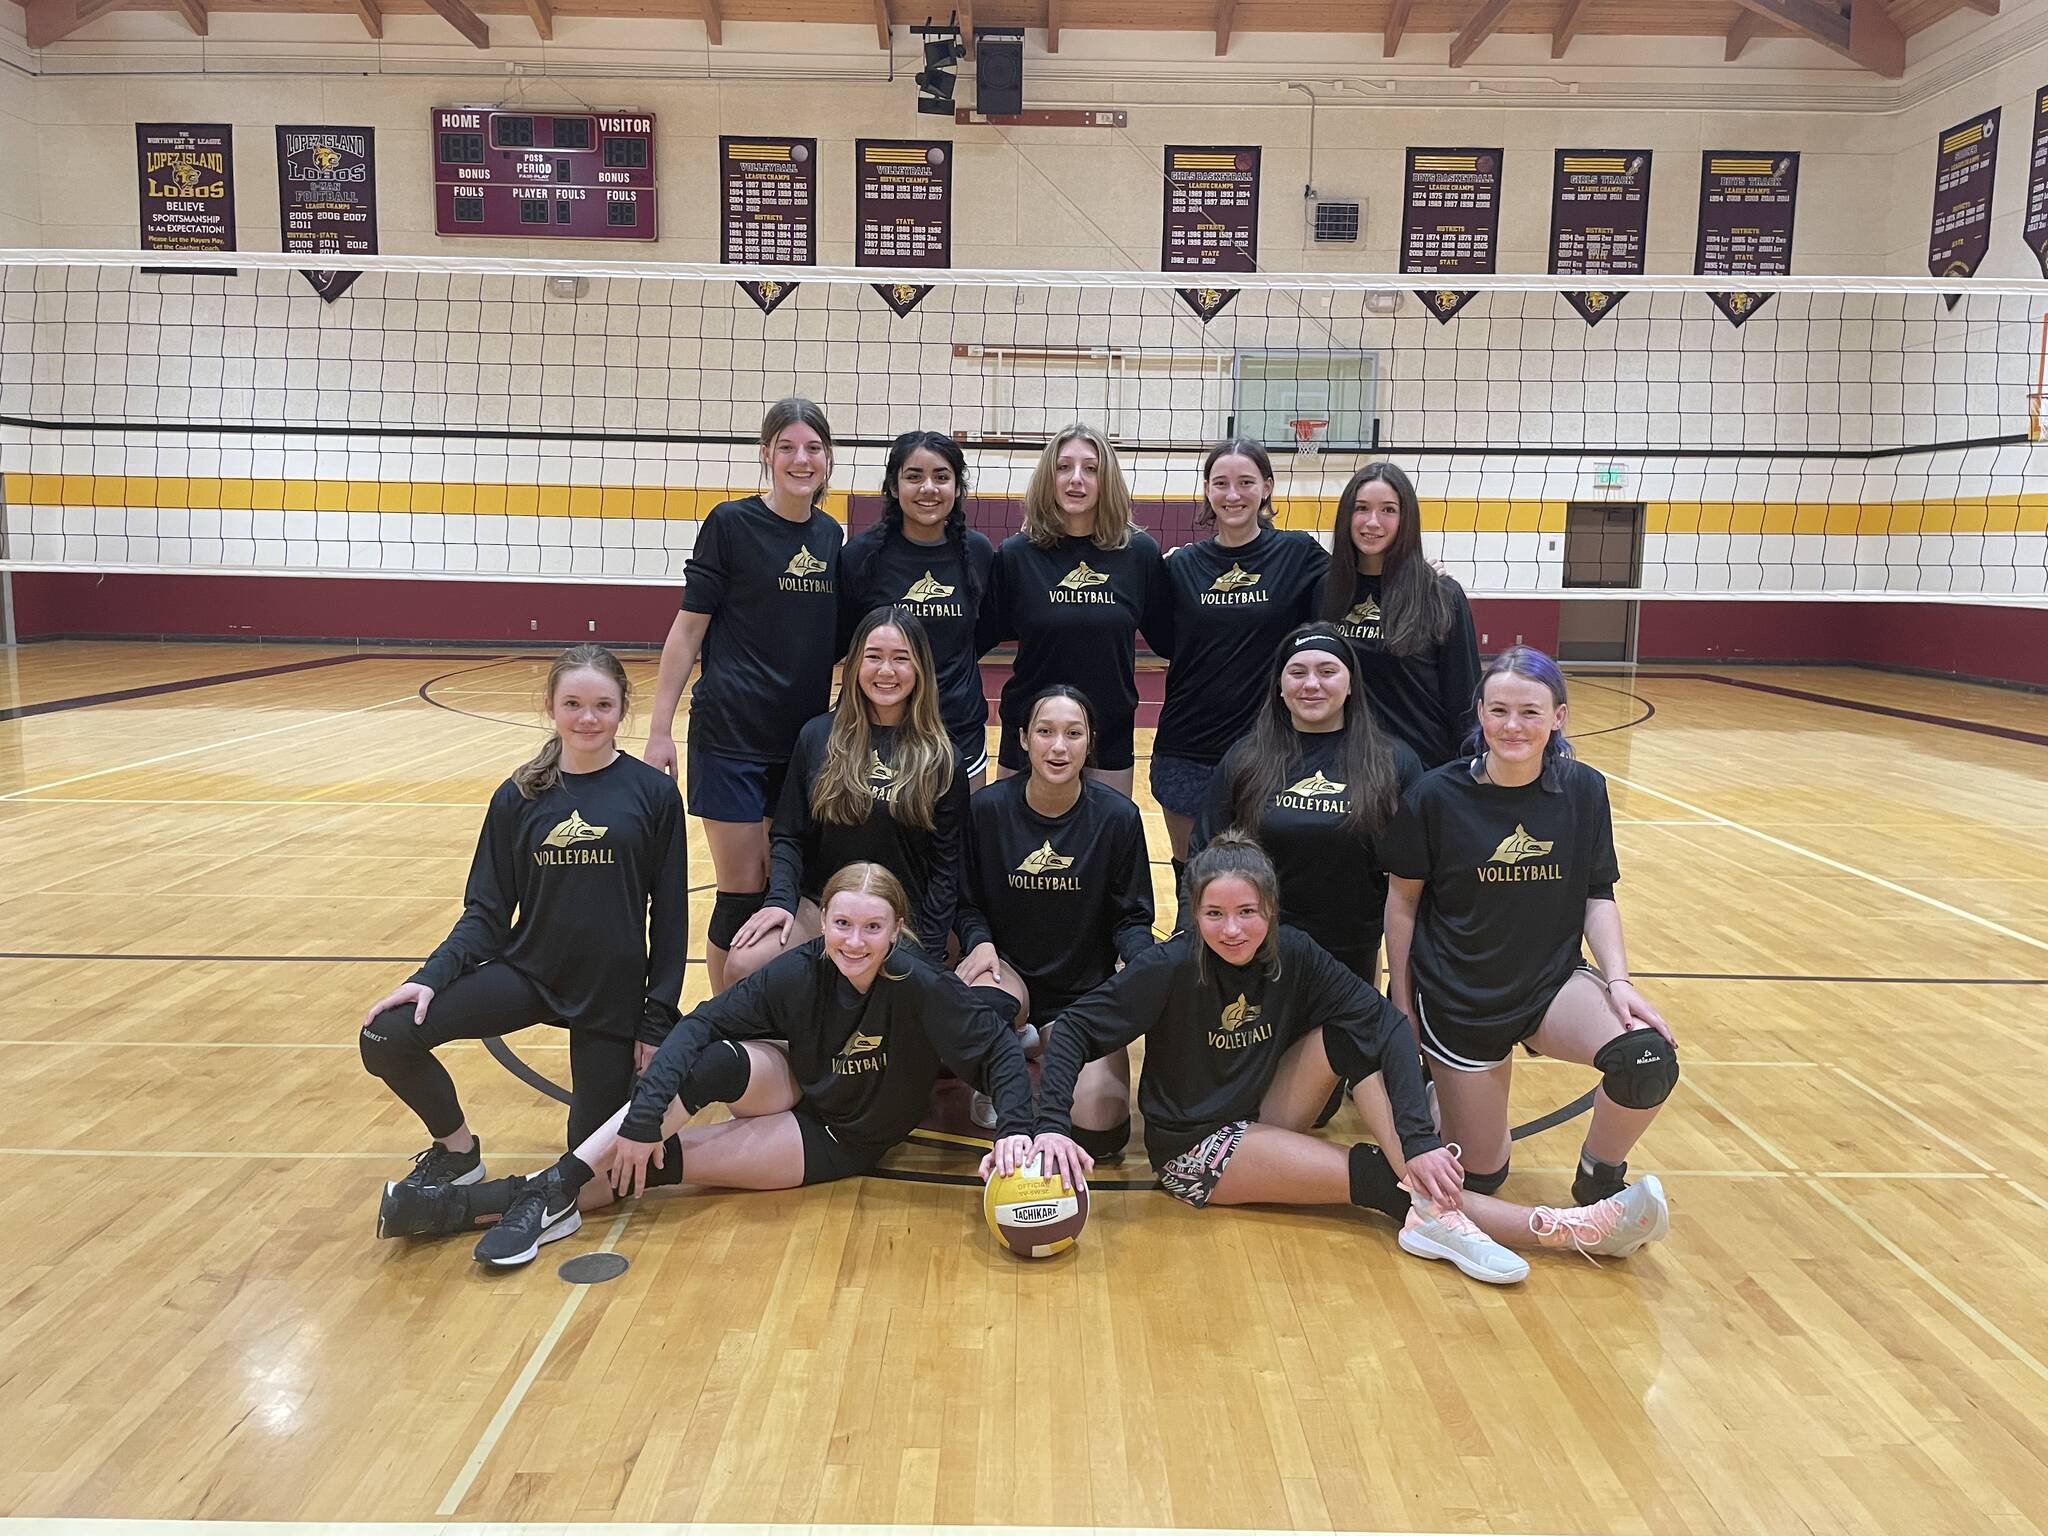 Contributed photo/Lopez High School's 2021 Volleyball team